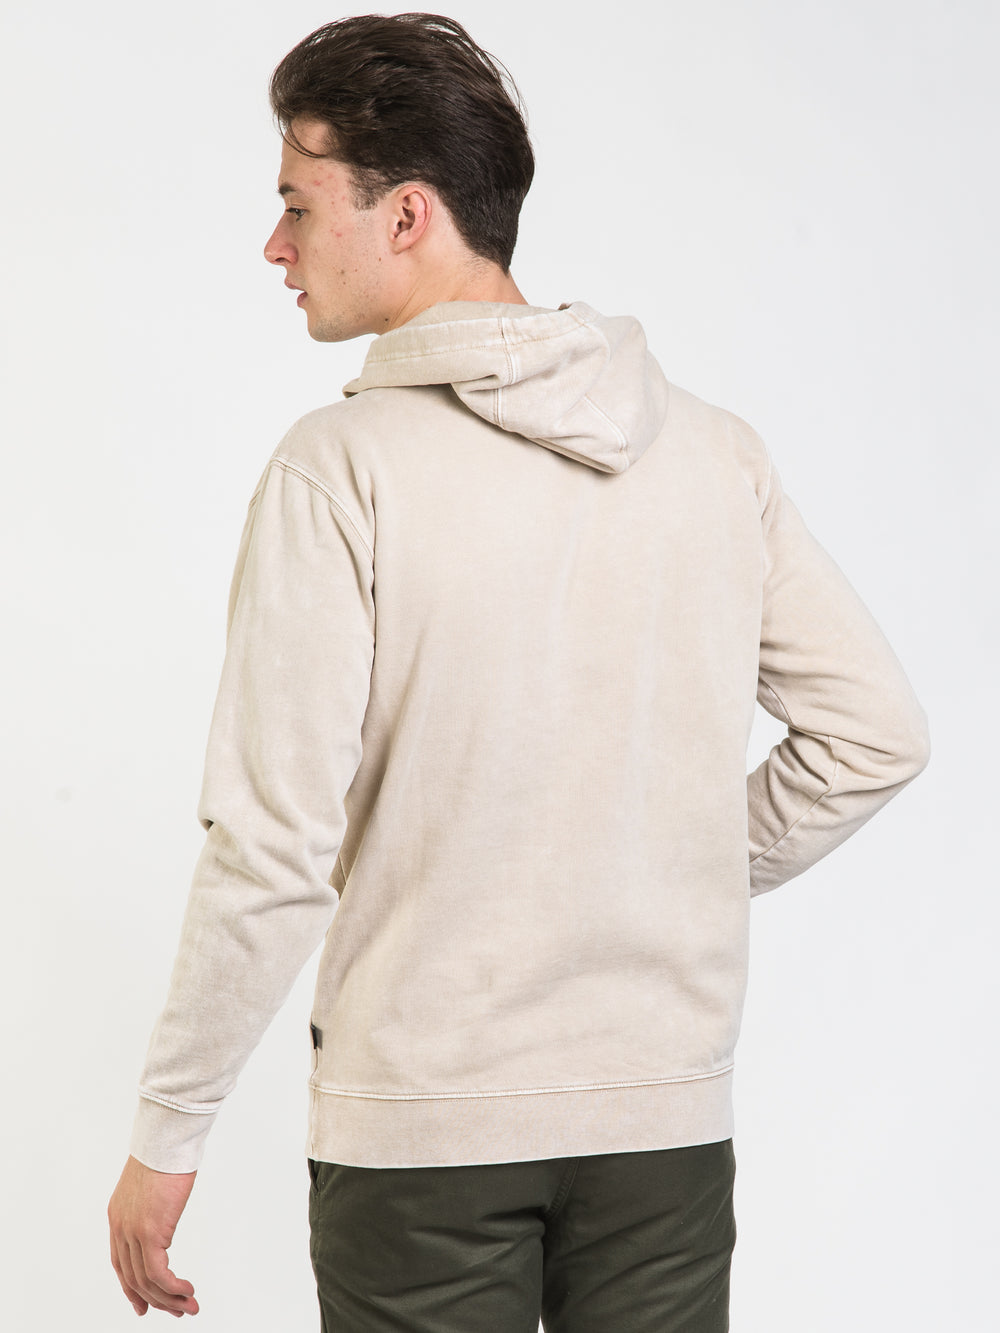 VANS MINERAL WASH PULL OVER HOODIE - CLEARANCE